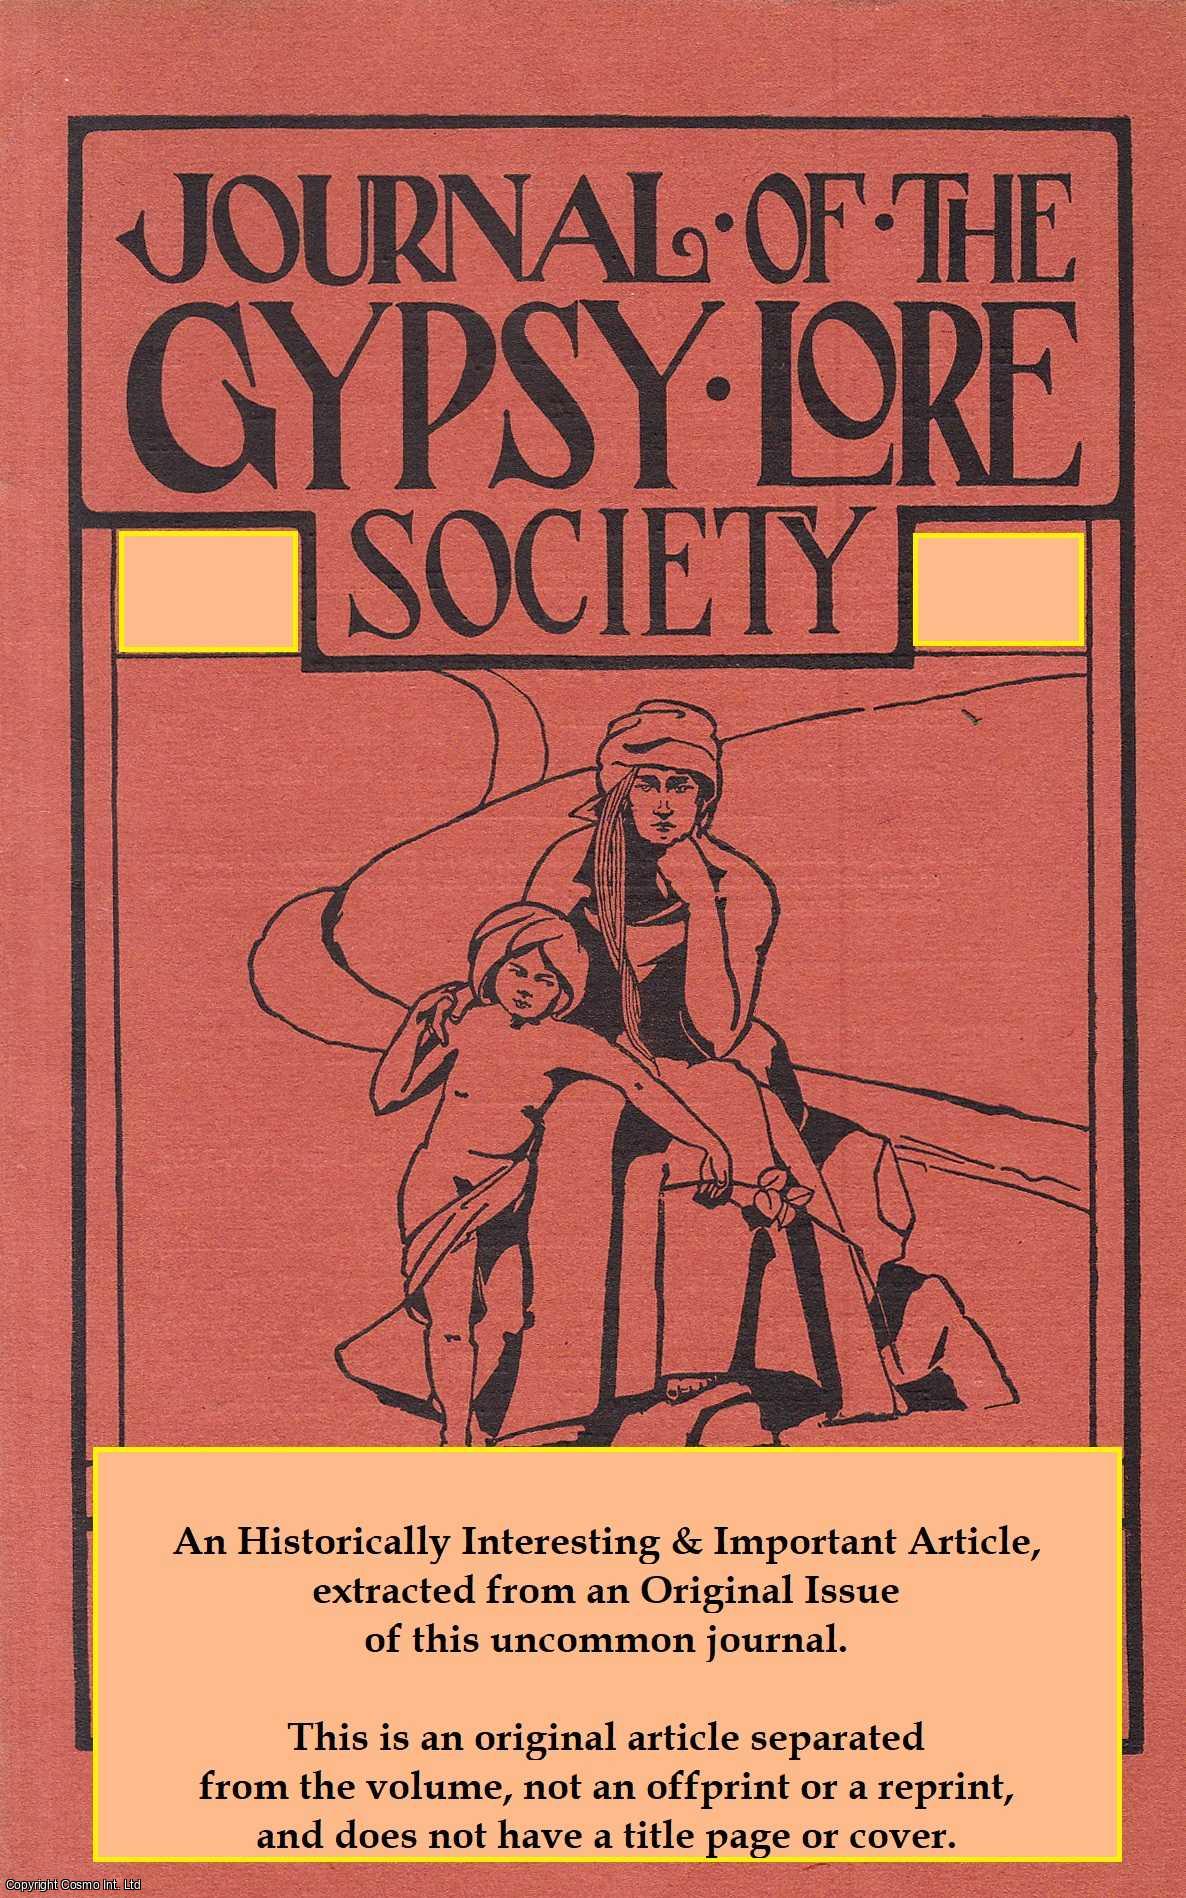 David MacRitchie - The Privileges of Gypsies : the idea of Gypsies possessing privileges of any kind seems, at the present day, too absurd for serious consideration. An uncommon original article from the Journal of the Gypsy Lore Society, 1908.